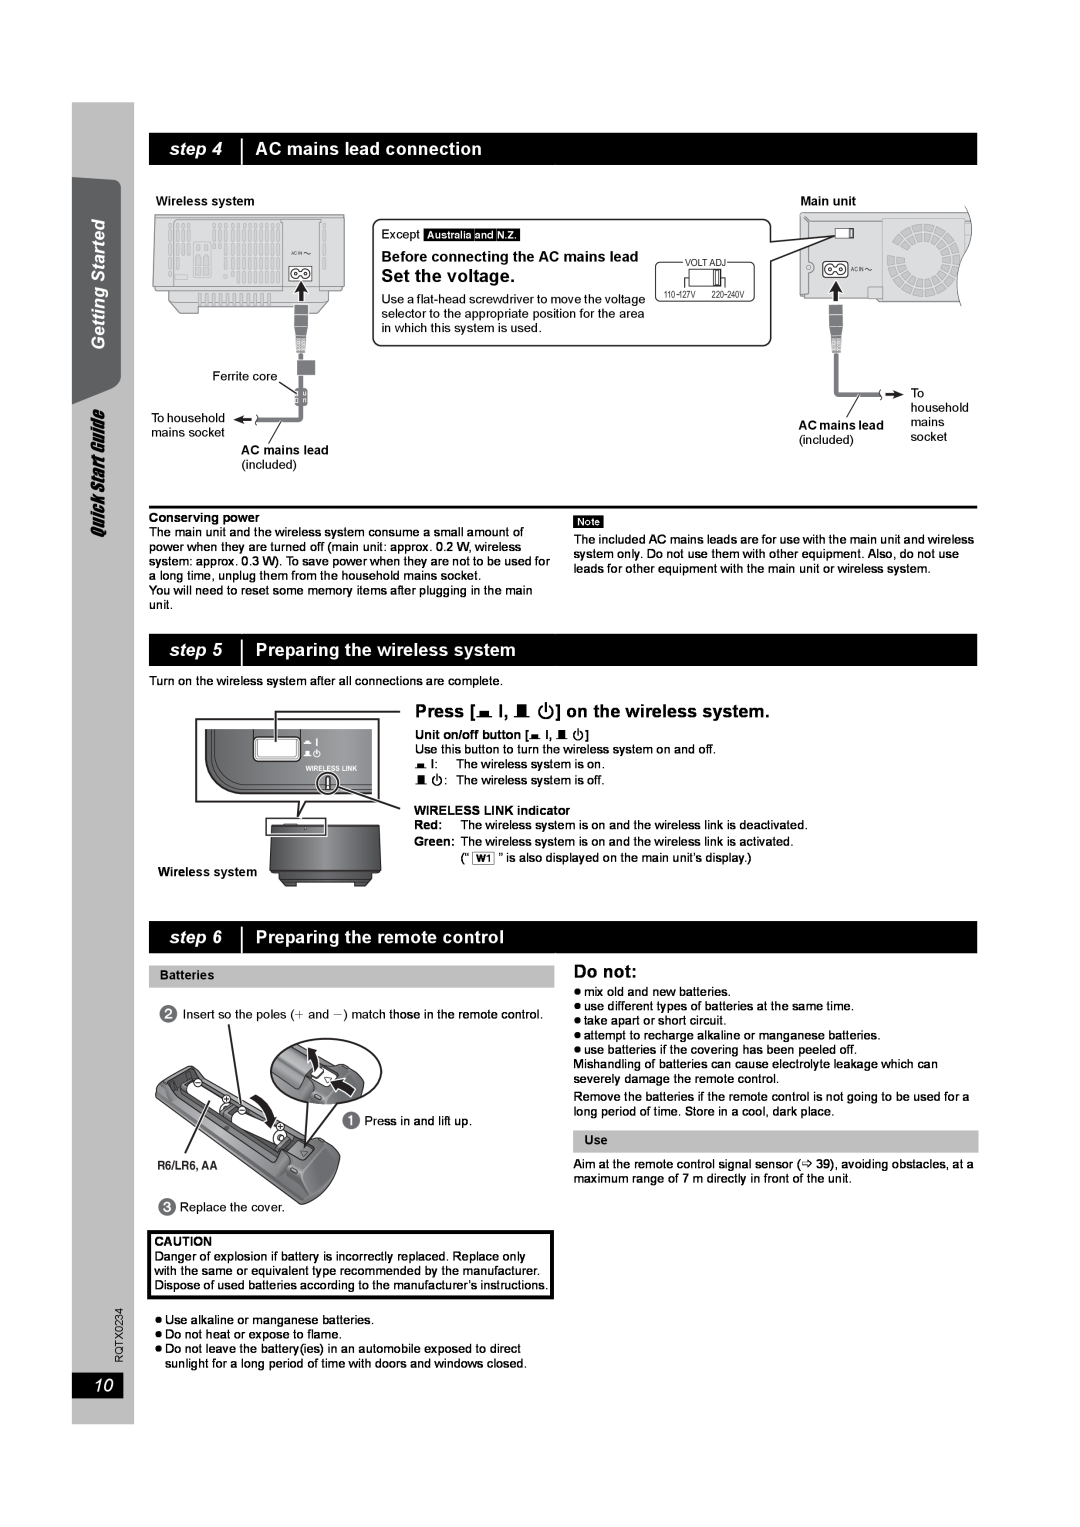 Panasonic SC-PT875 AC mains lead connection, Start Guide Getting Started, Set the voltage, Quick, Do not, step, R6/LR6, AA 